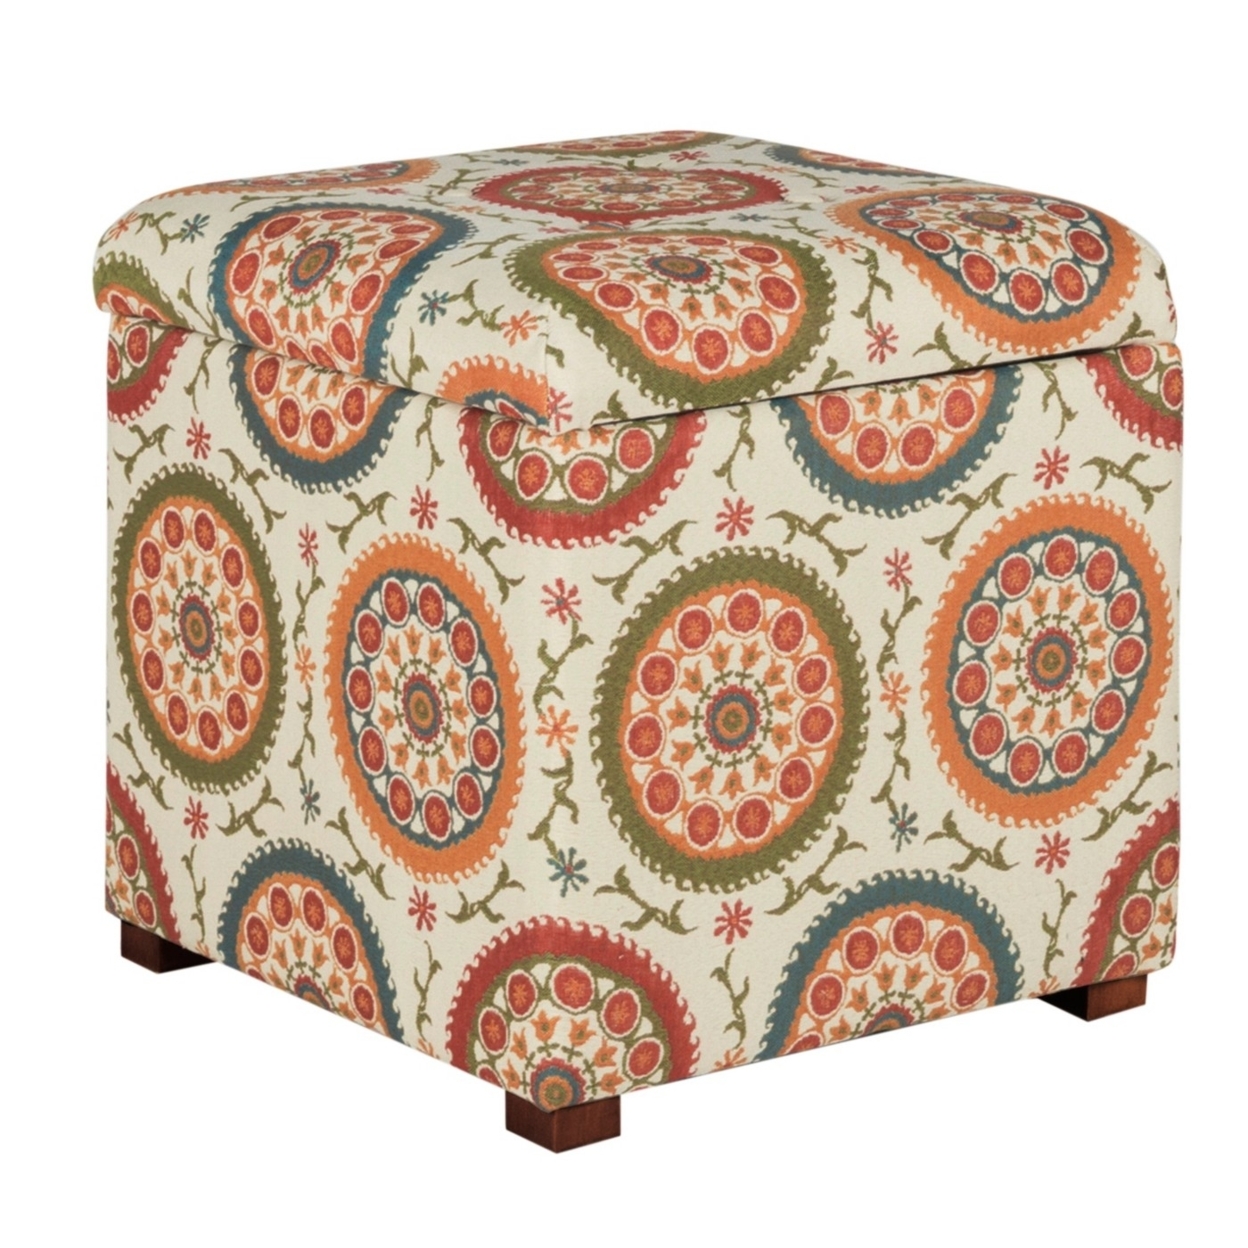 Suzani Patterned Fabric Upholstered Wooden Ottoman With Hidden Storage, Multicolor- Saltoro Sherpi